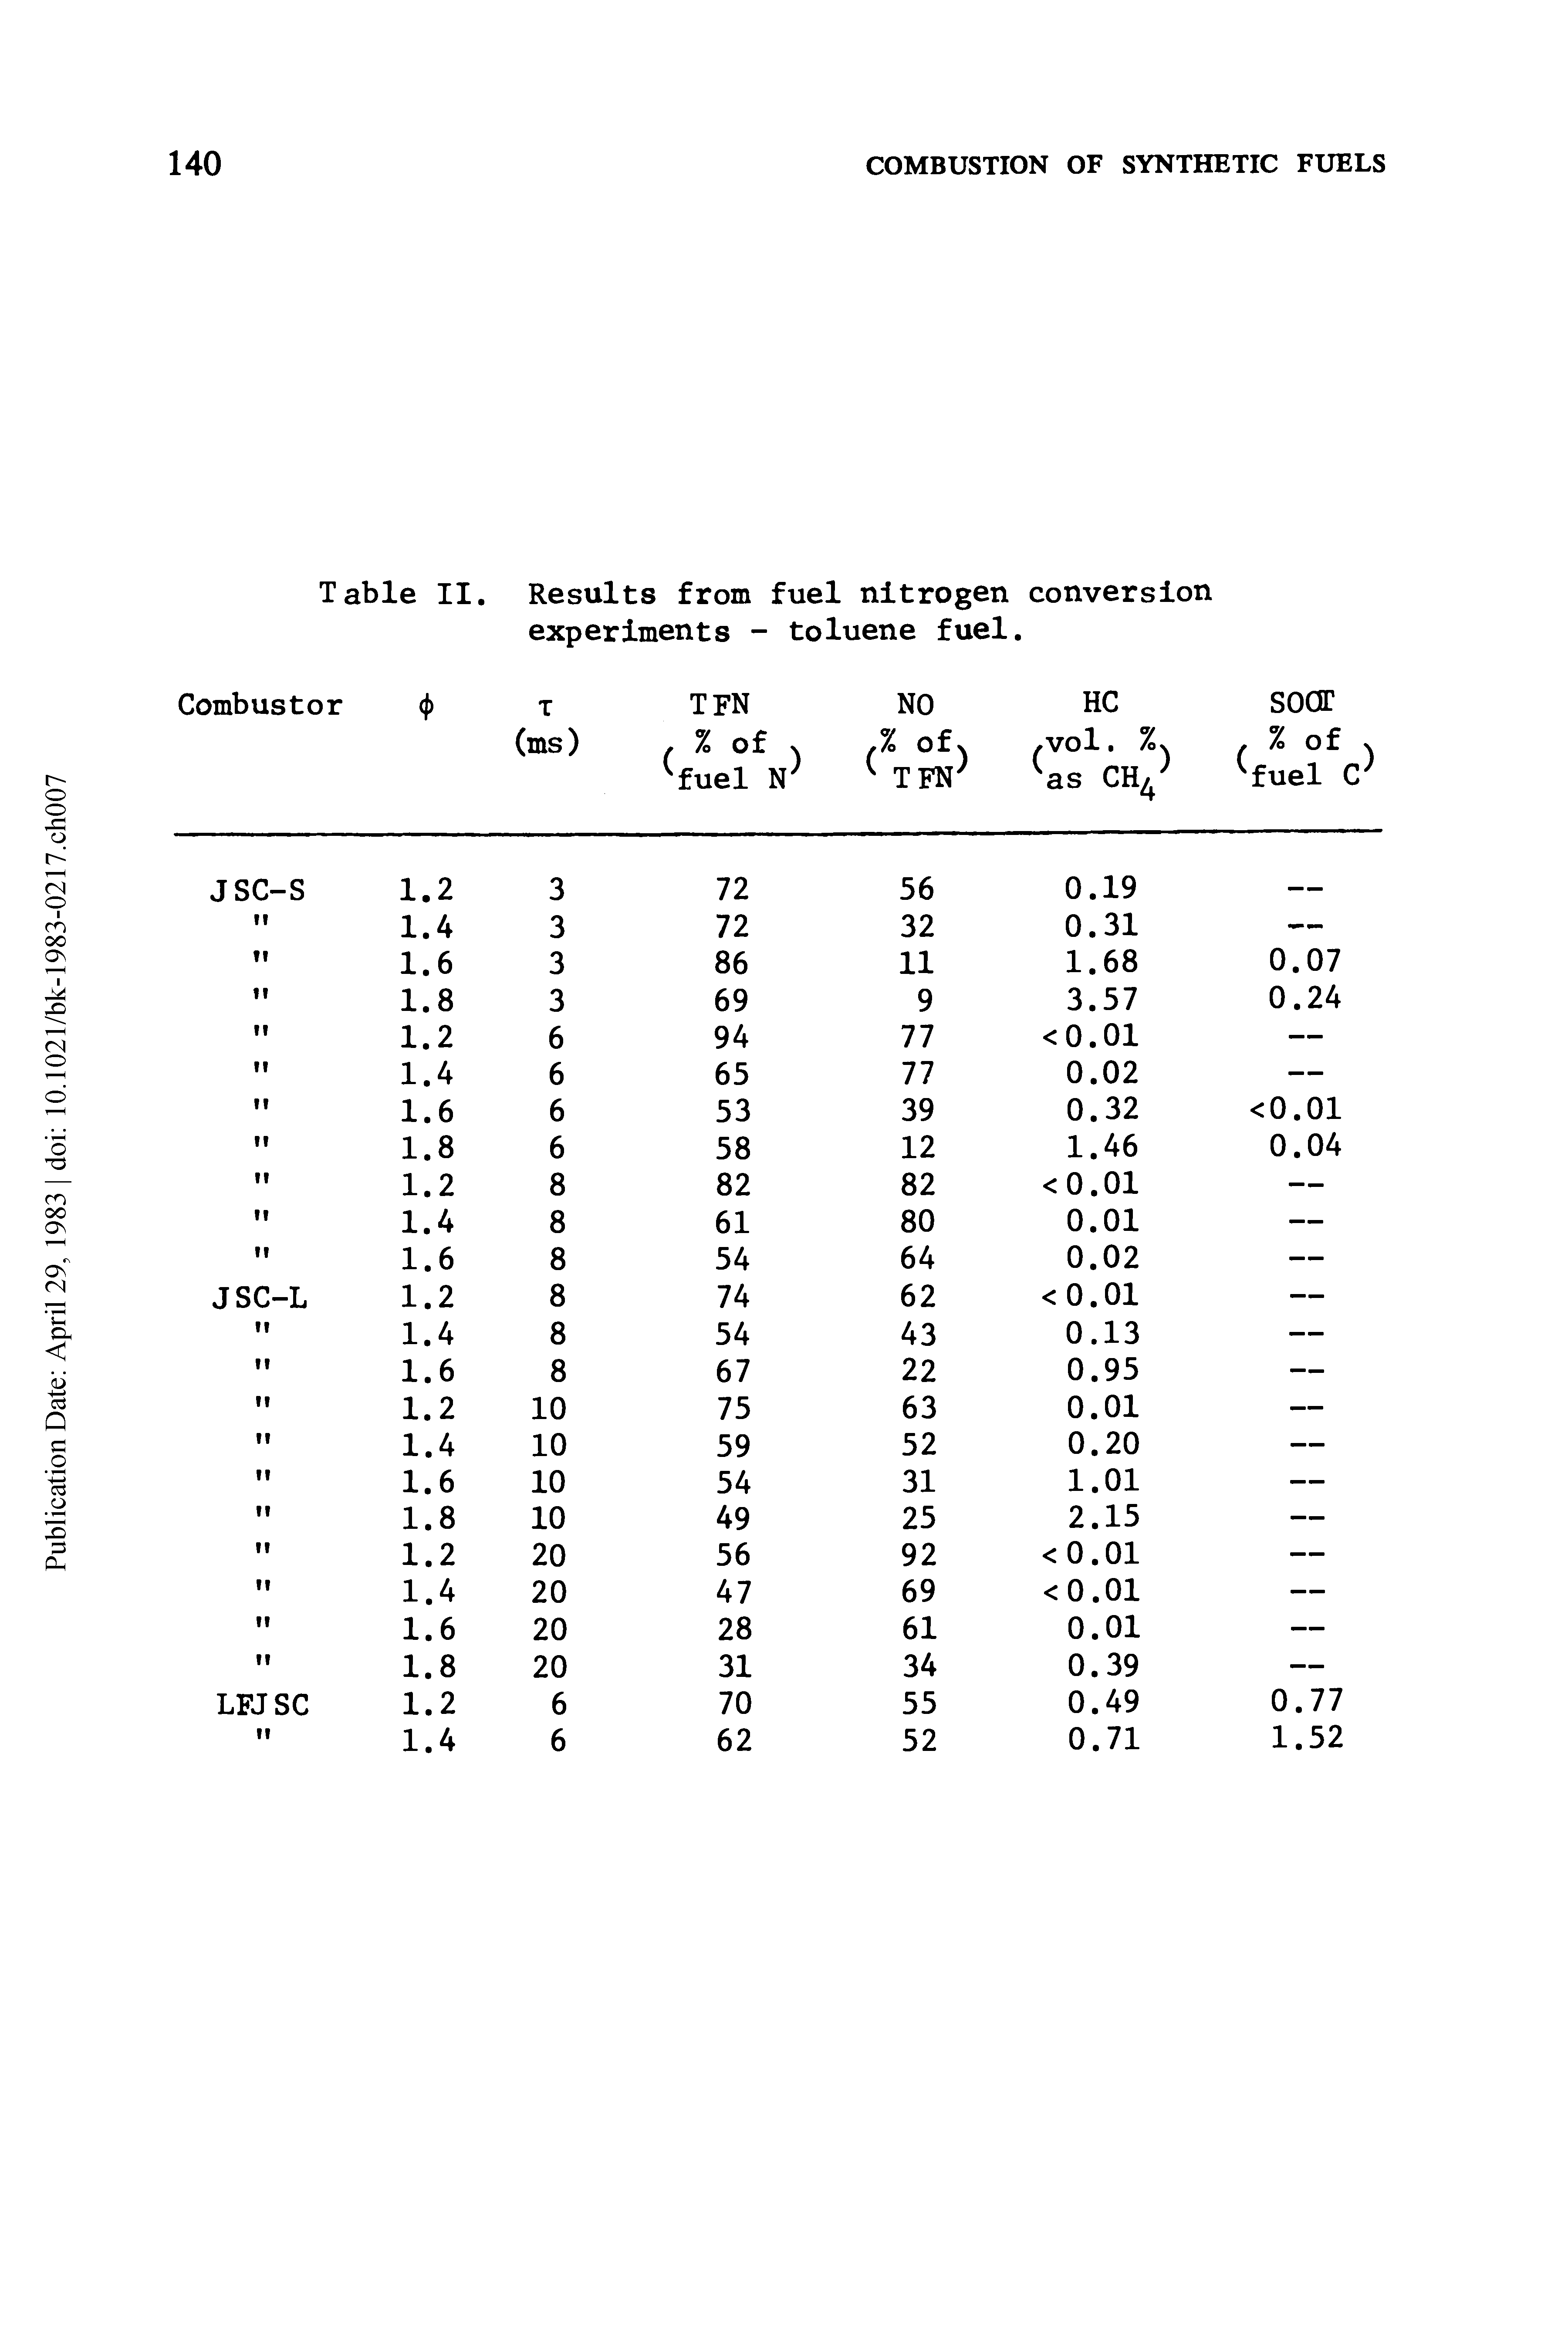 Table II. Combustor < > Results from fuel nitrogen conversion experiments - toluene fuel. t TFN NO hc soar (ms) / % of v, % ofv, vol. %v, % of v fuel N TFN" las CH fuel C ...